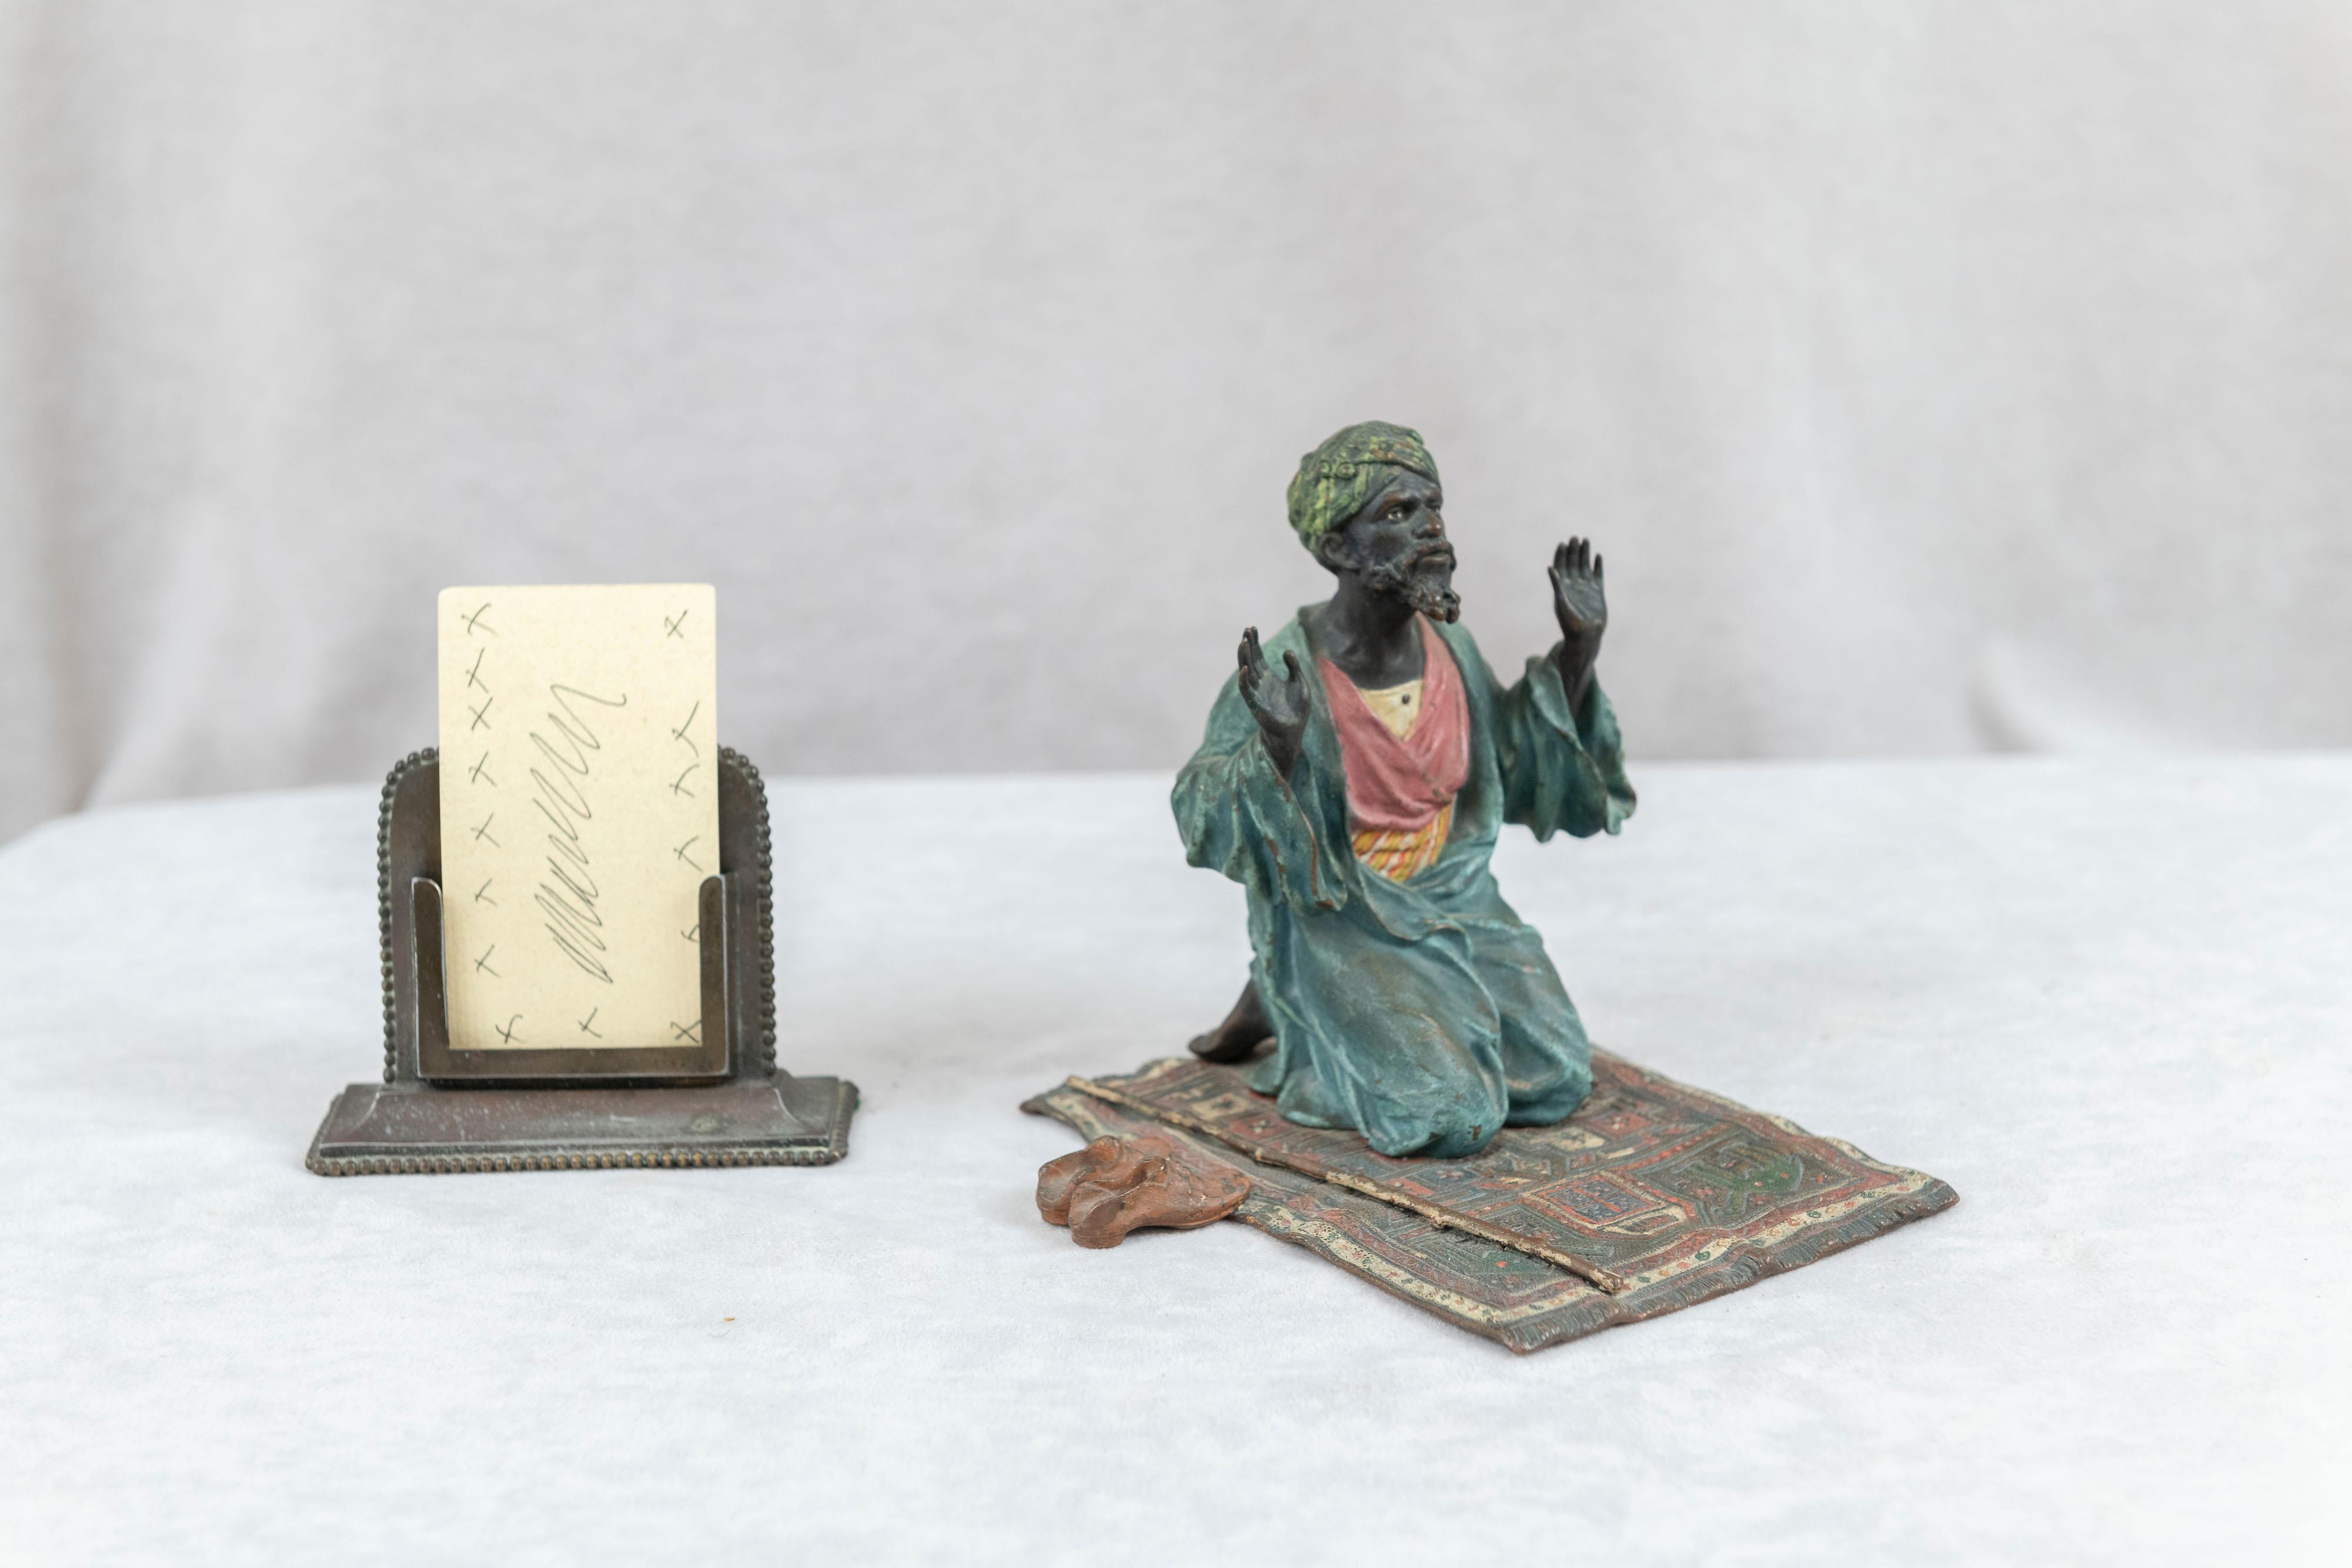  This very detailed Vienna bronze was made by the premier foundry of this genre, Franz Bergmann, and does bear his seal on the underside of the rug. The man praying is delicately painted and finely cast. His little shoes on the side of the rug are